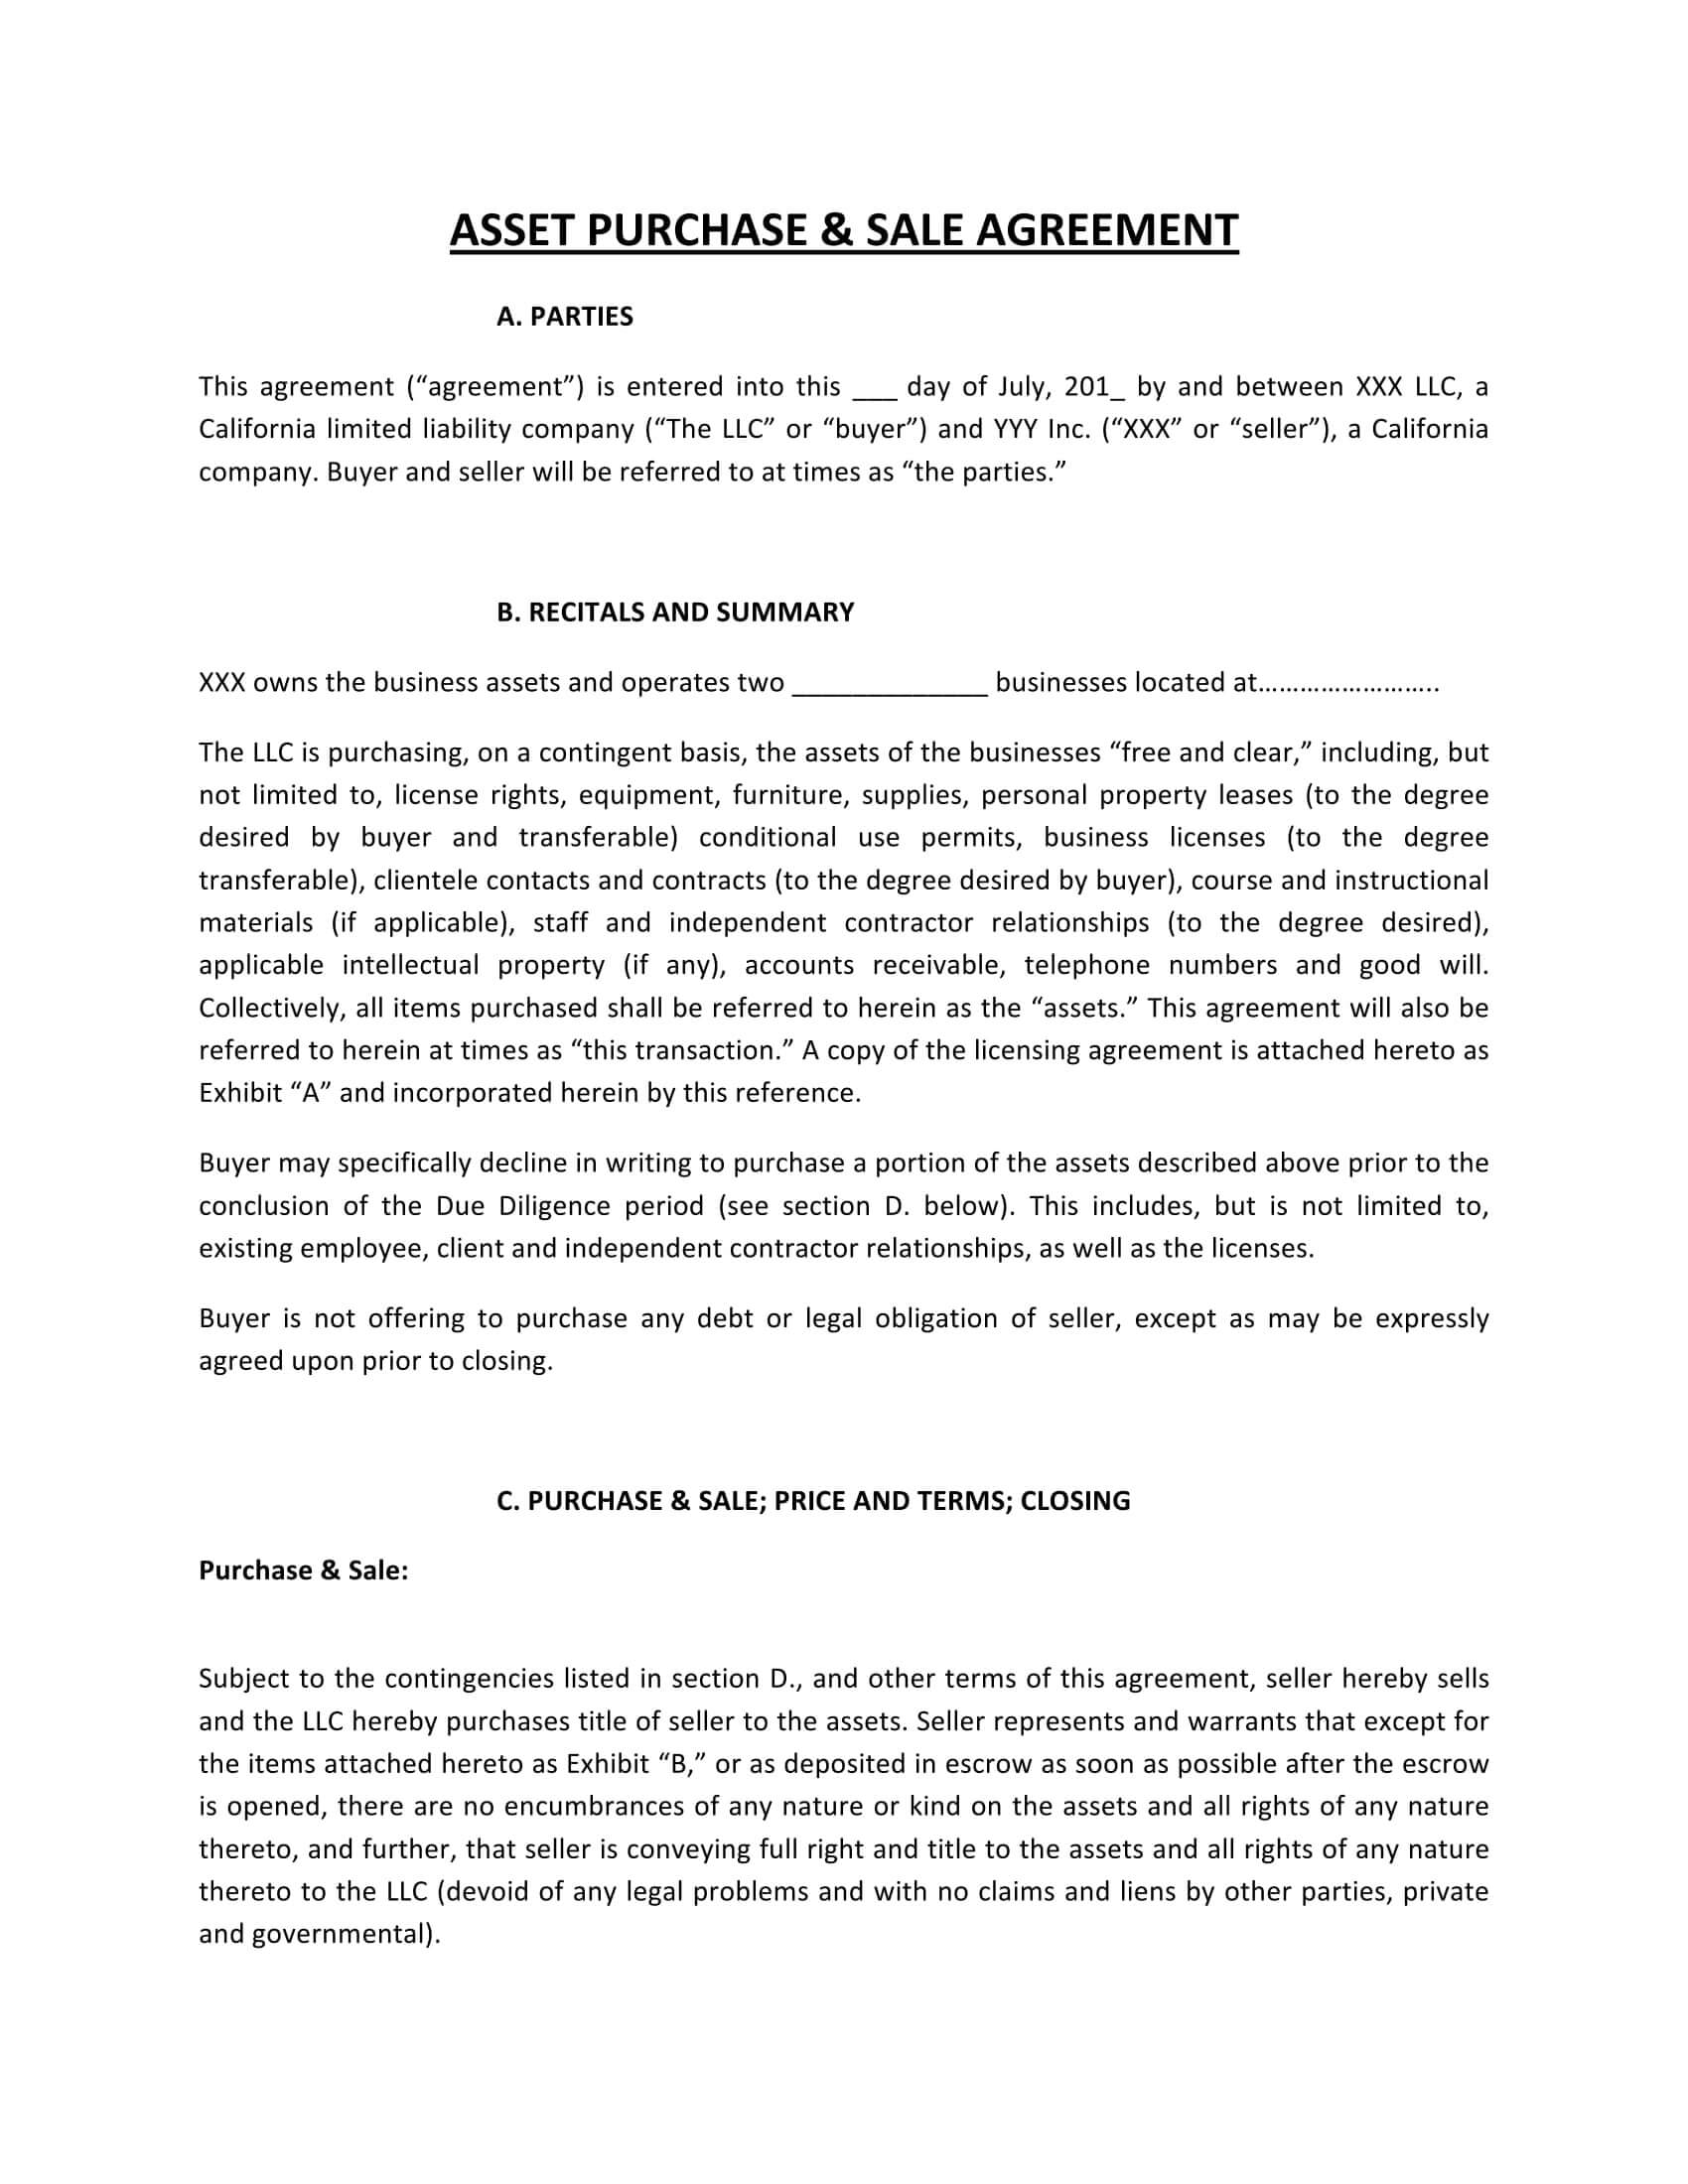 Transfer Pricing Agreement Template ] – Land Contract Form 5 For Asset Purchase Agreement Template